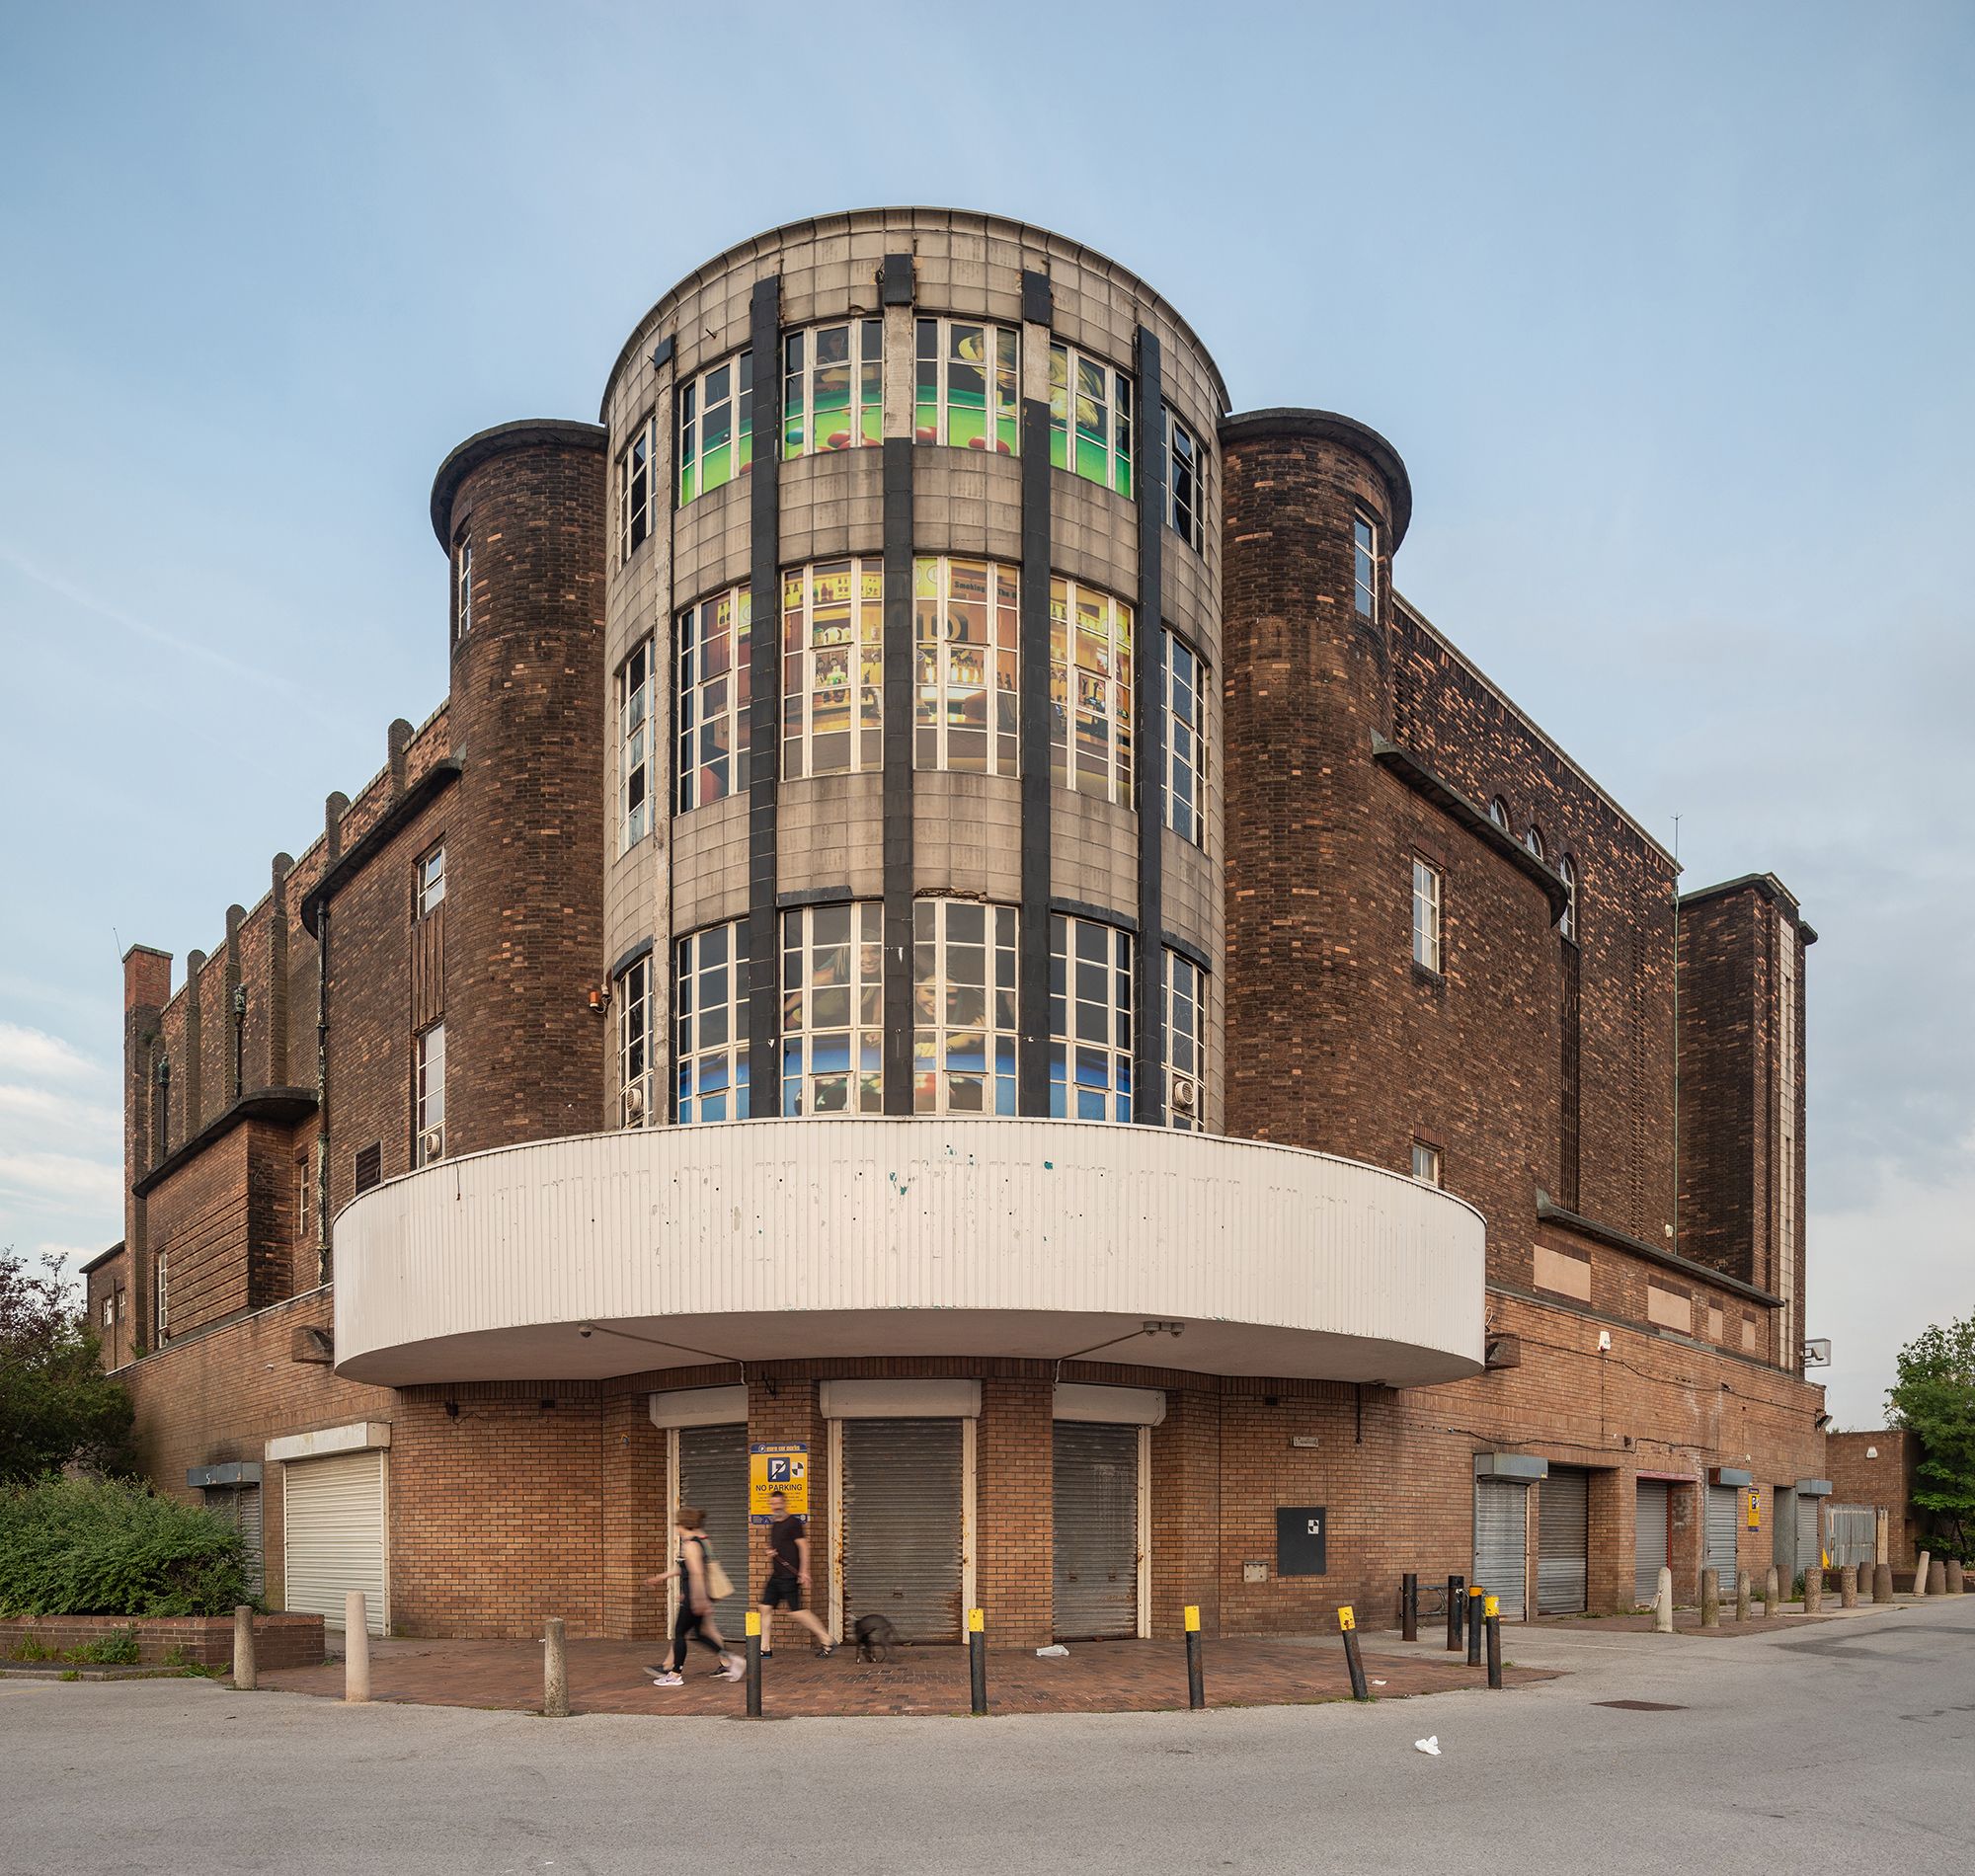 Former Abbey Cinema, Liverpool — last screened a film in 1979